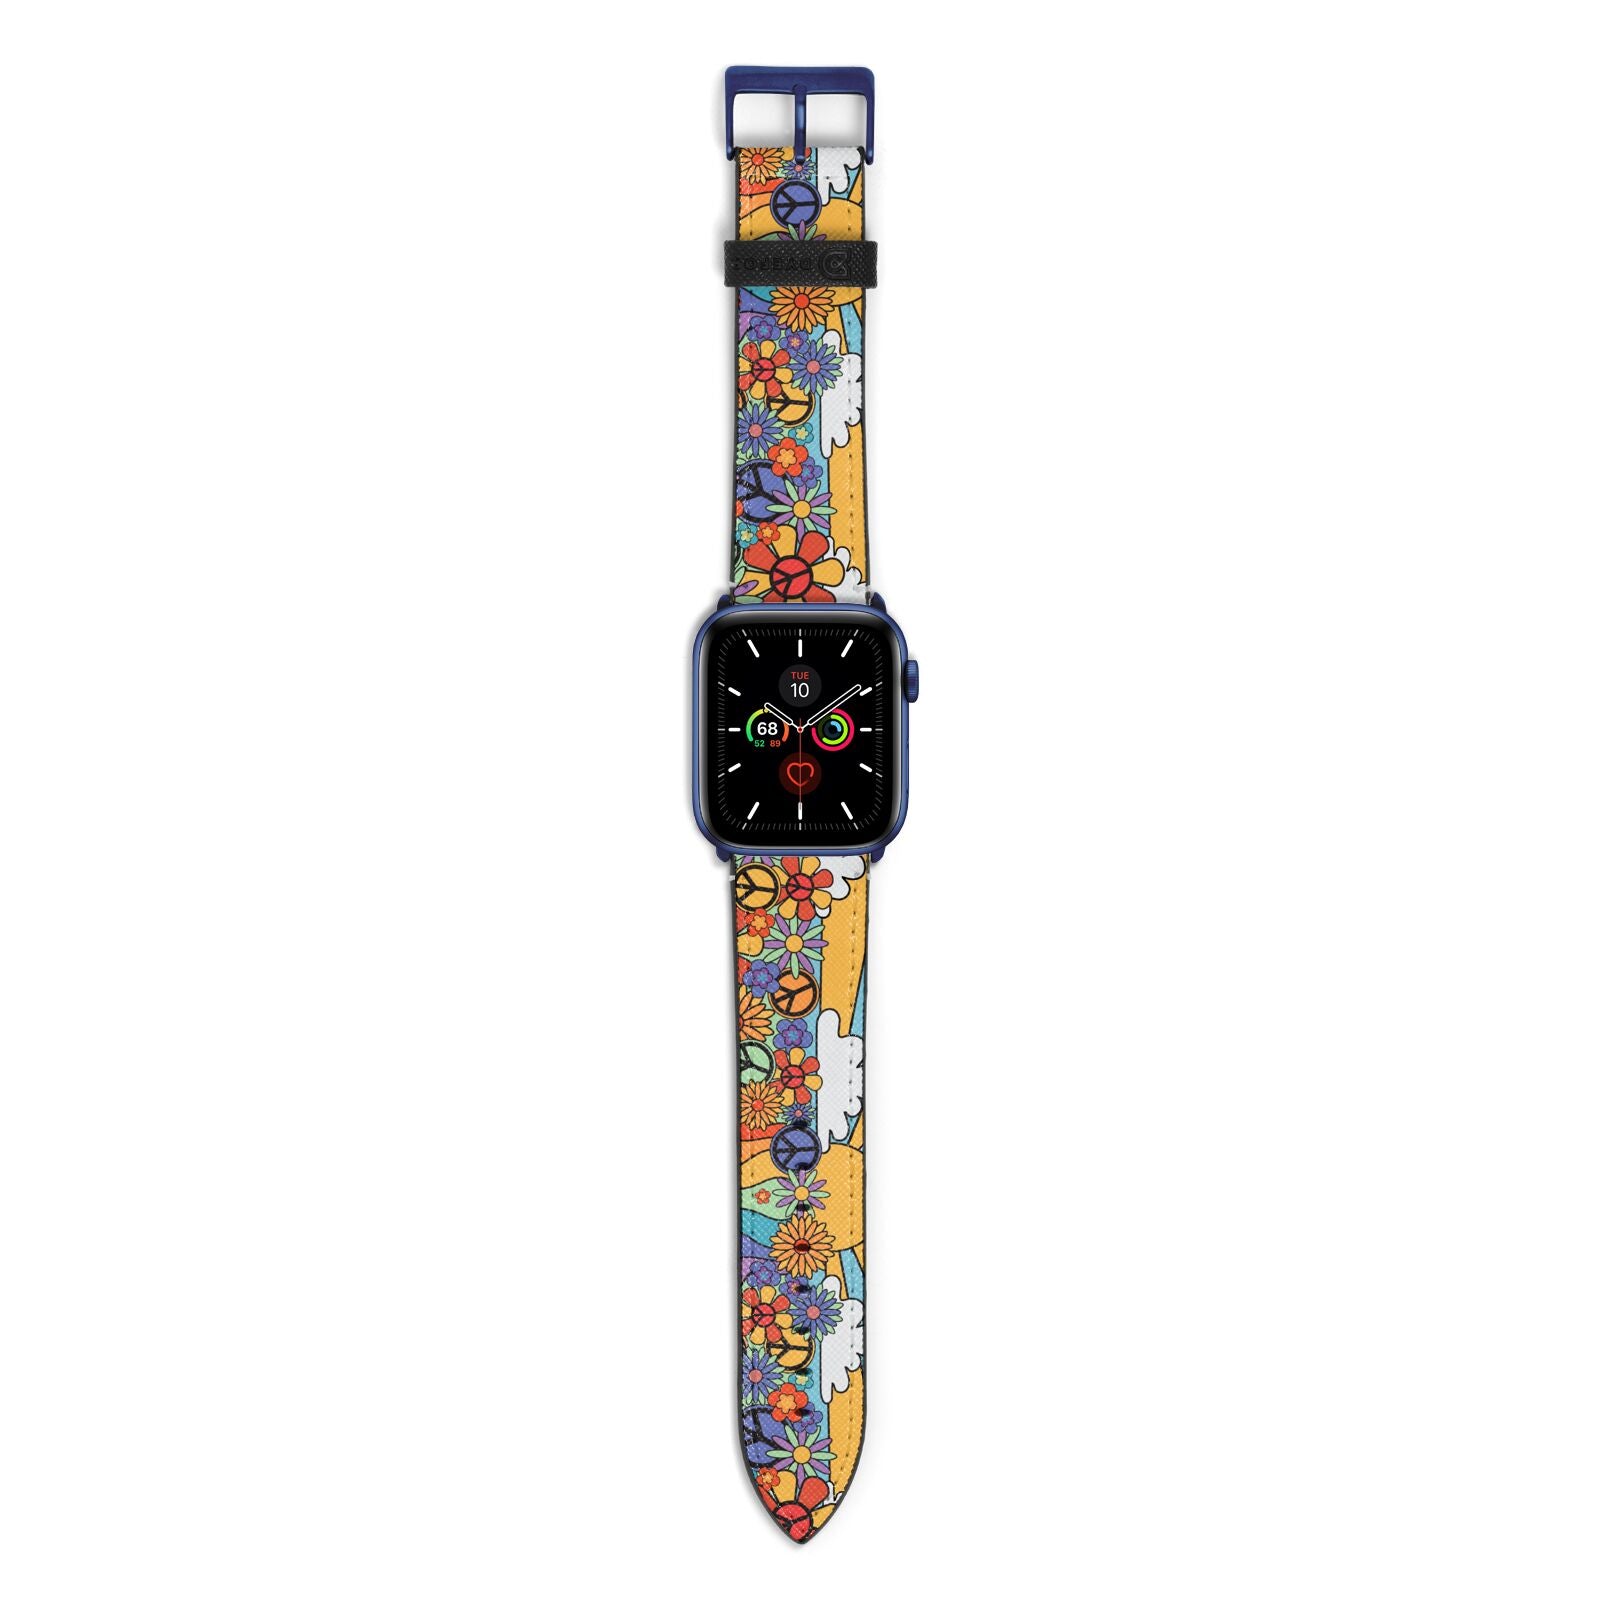 Seventies Groovy Retro Apple Watch Strap with Blue Hardware